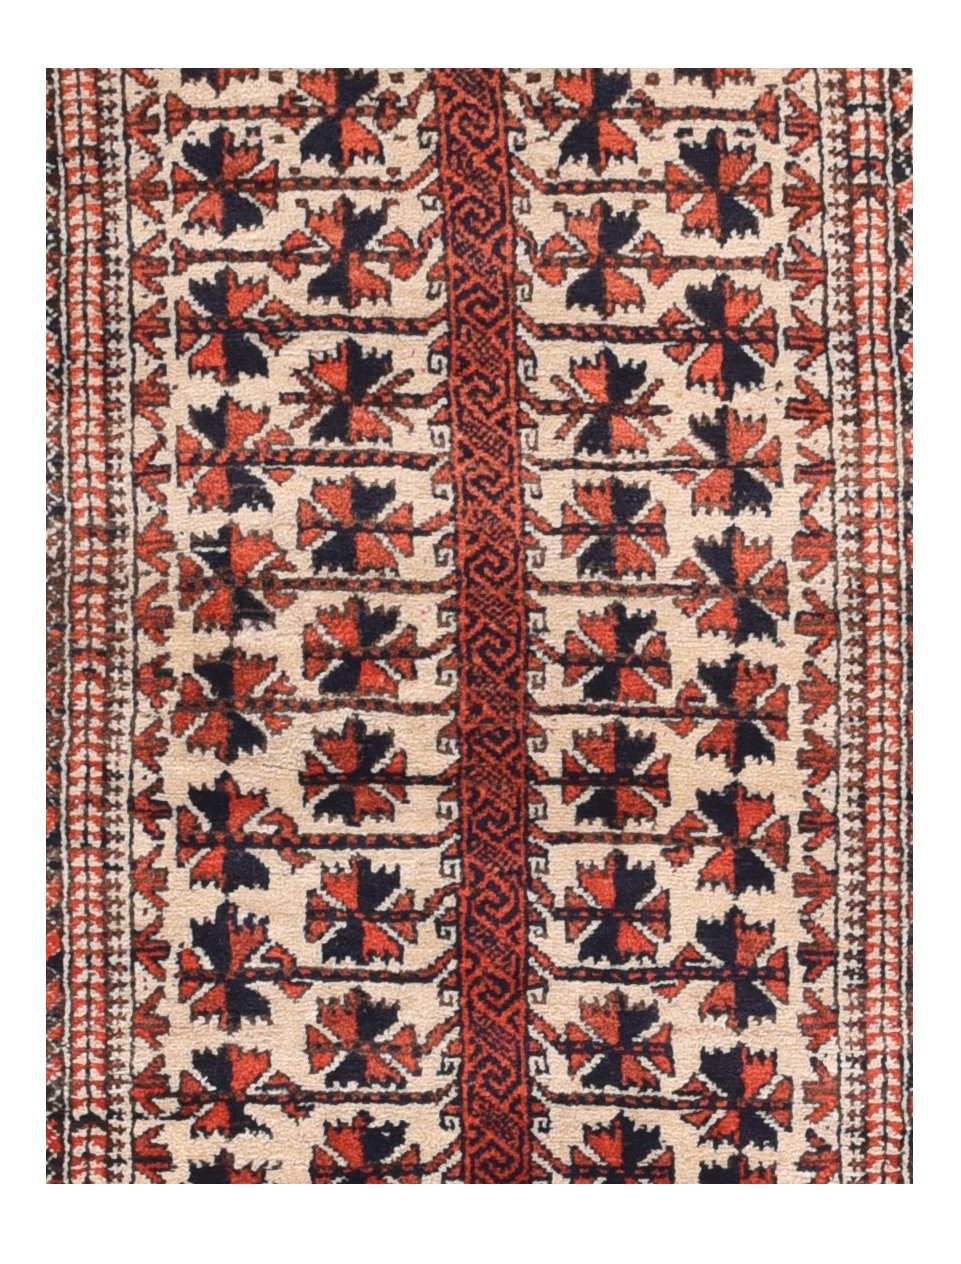 Antique Balouch Persian Scatter Rug